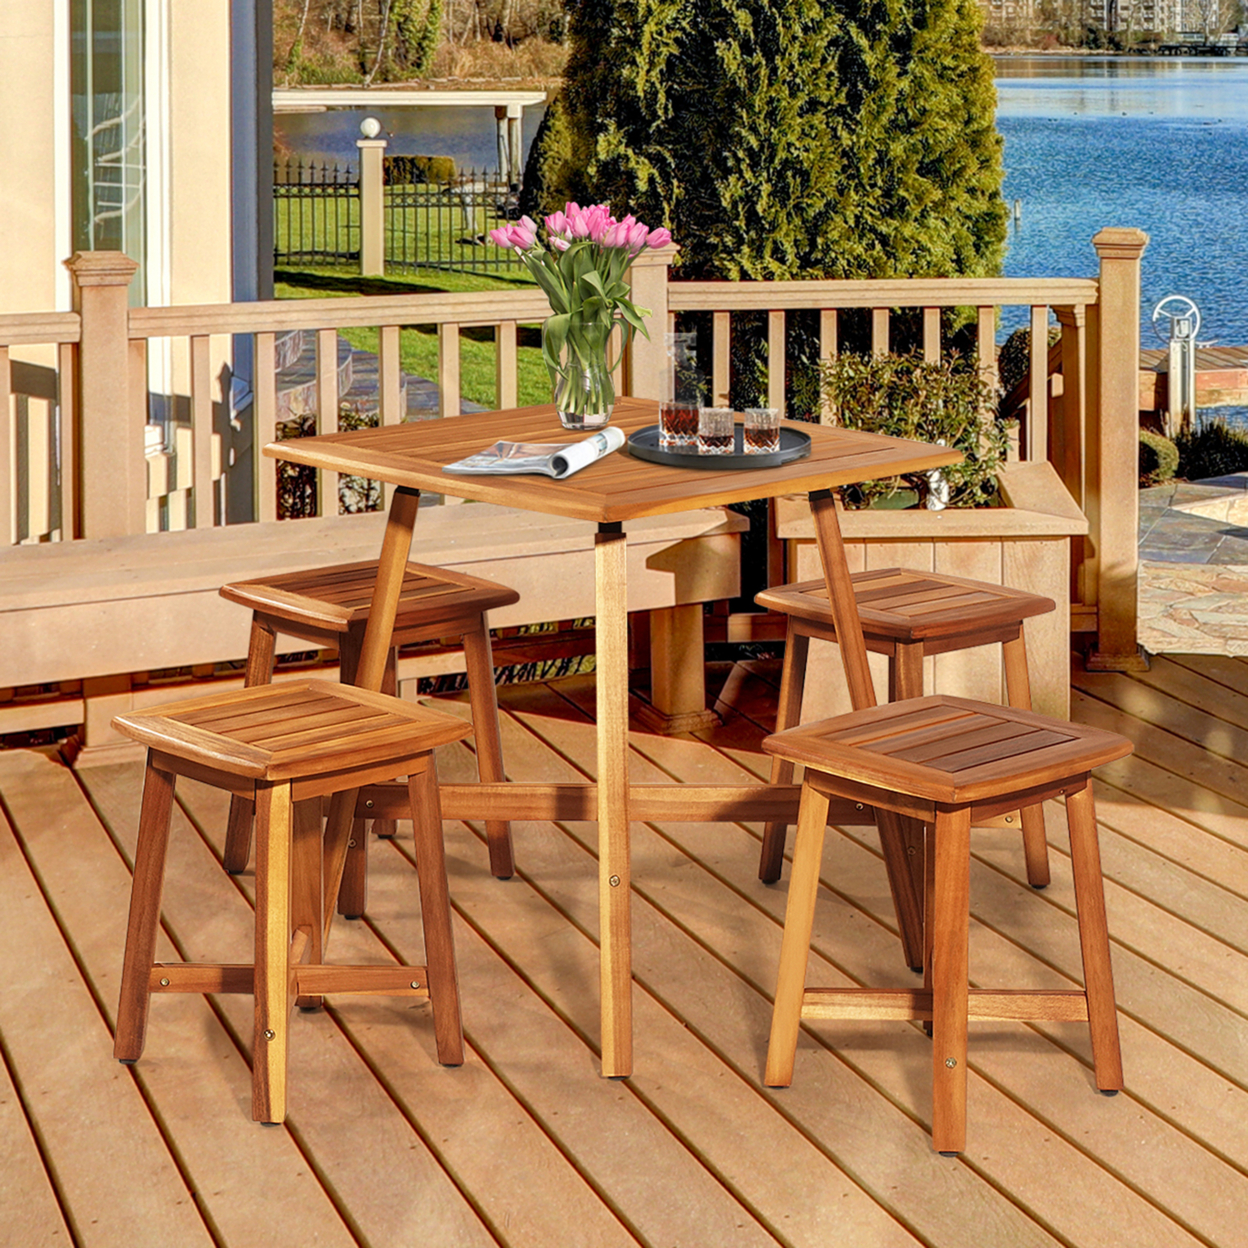 5PCS Wooden Patio Dining Furniture Set Yard Outdoor W/ 4 Square Stools